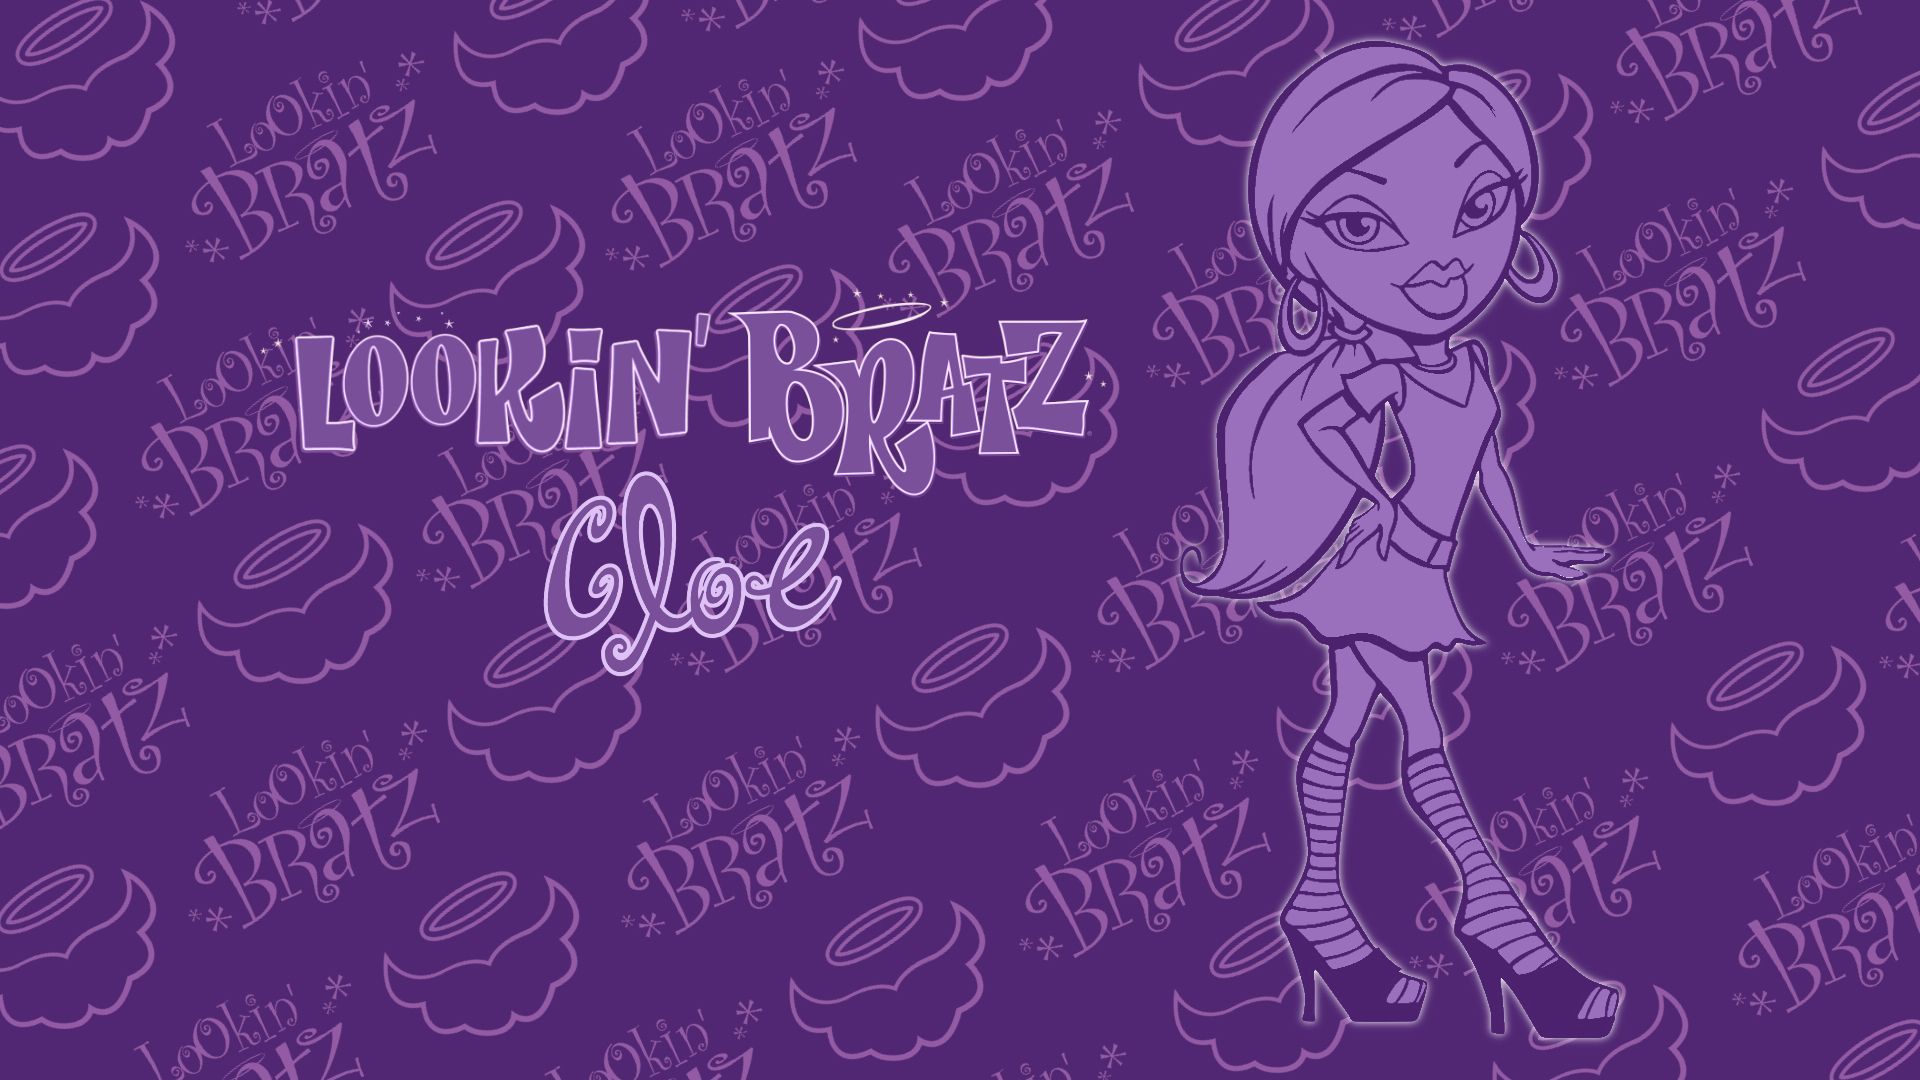 A purple background with cartoon characters - Bratz